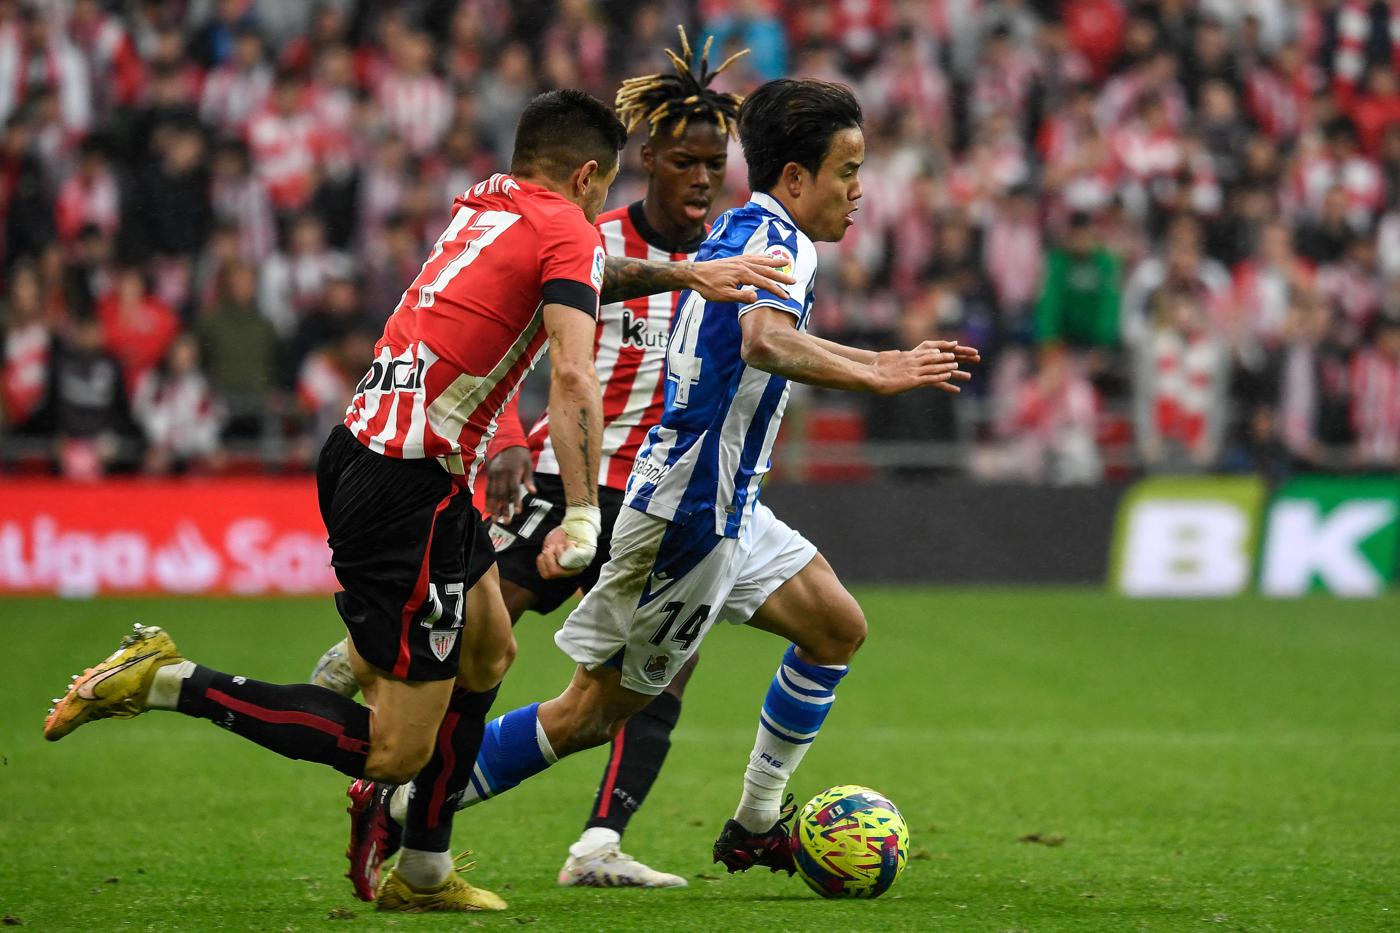 Athletic - Real S-Dad - 2:0. Spanish Championship, round 29. Match review,